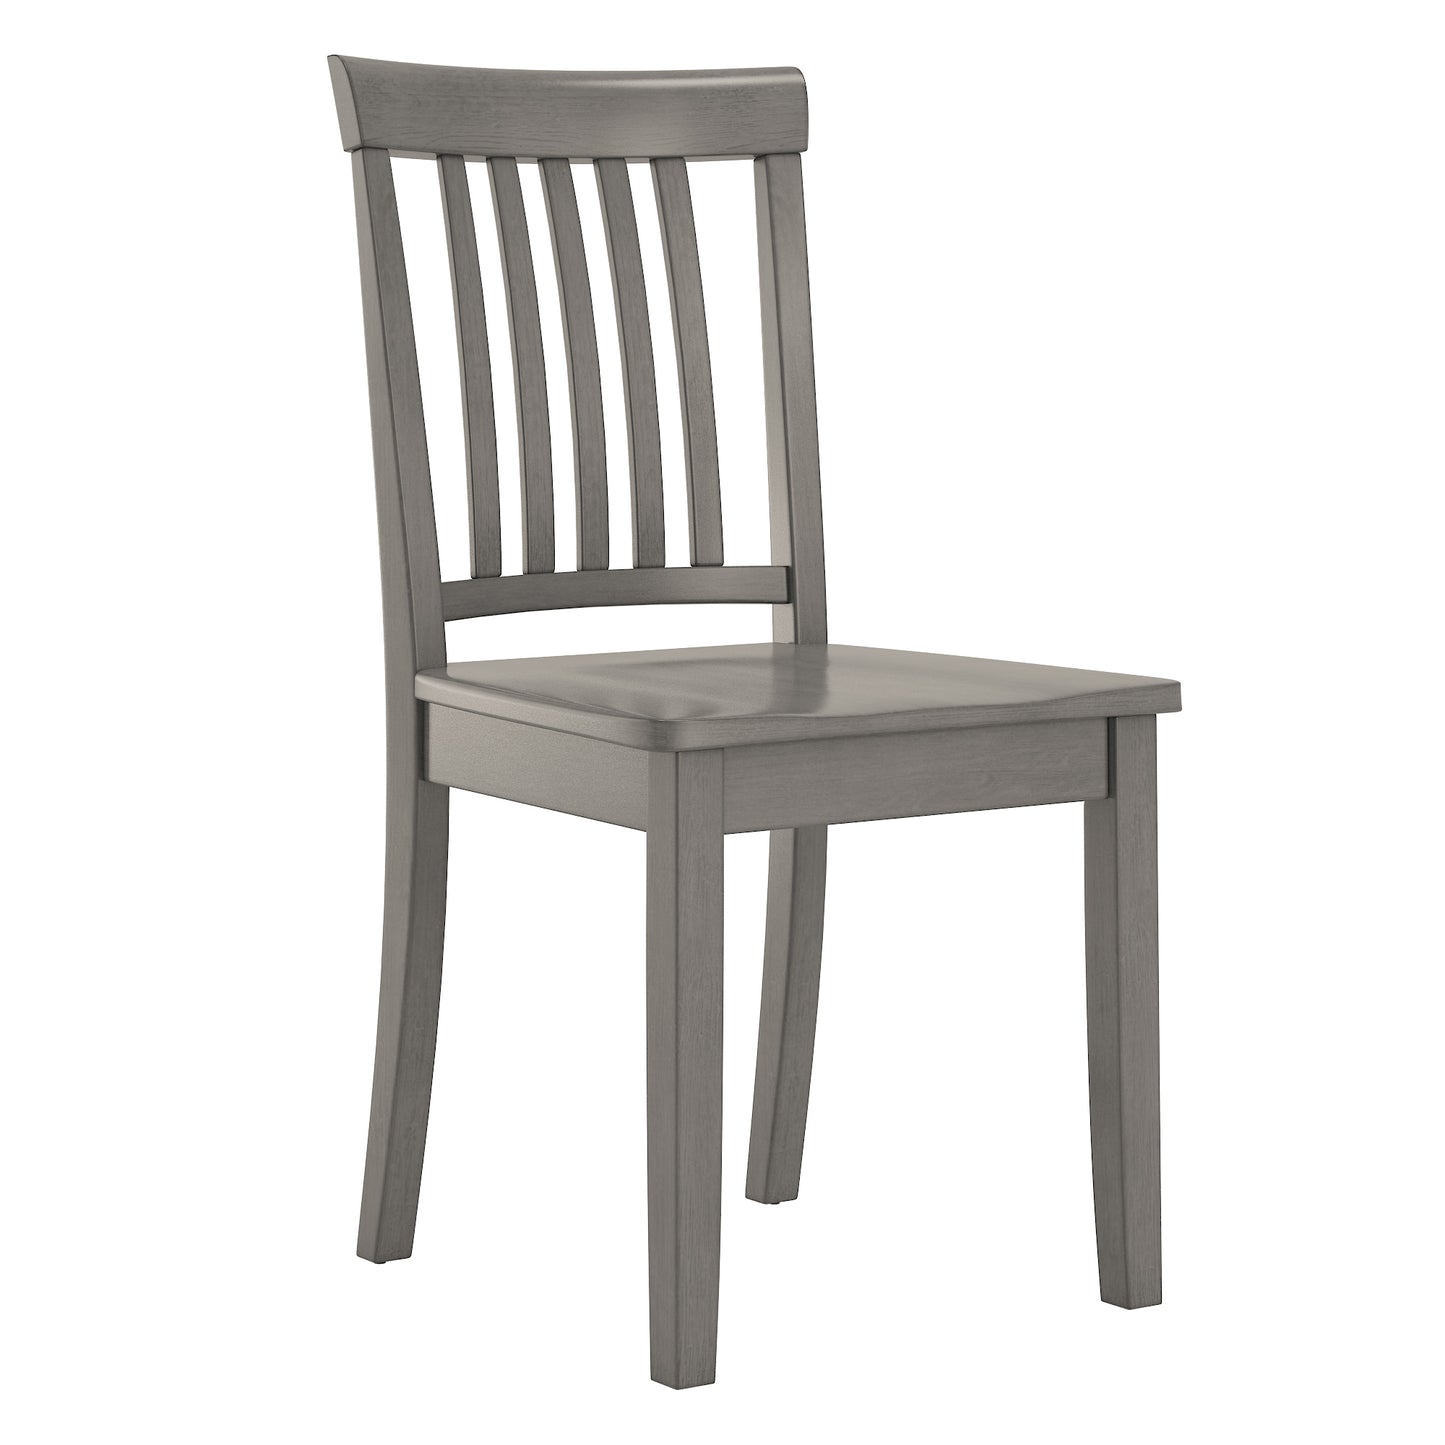 60-inch Rectangular Antique Grey Dining Set - Mission Back Chairs, 7-Piece Set